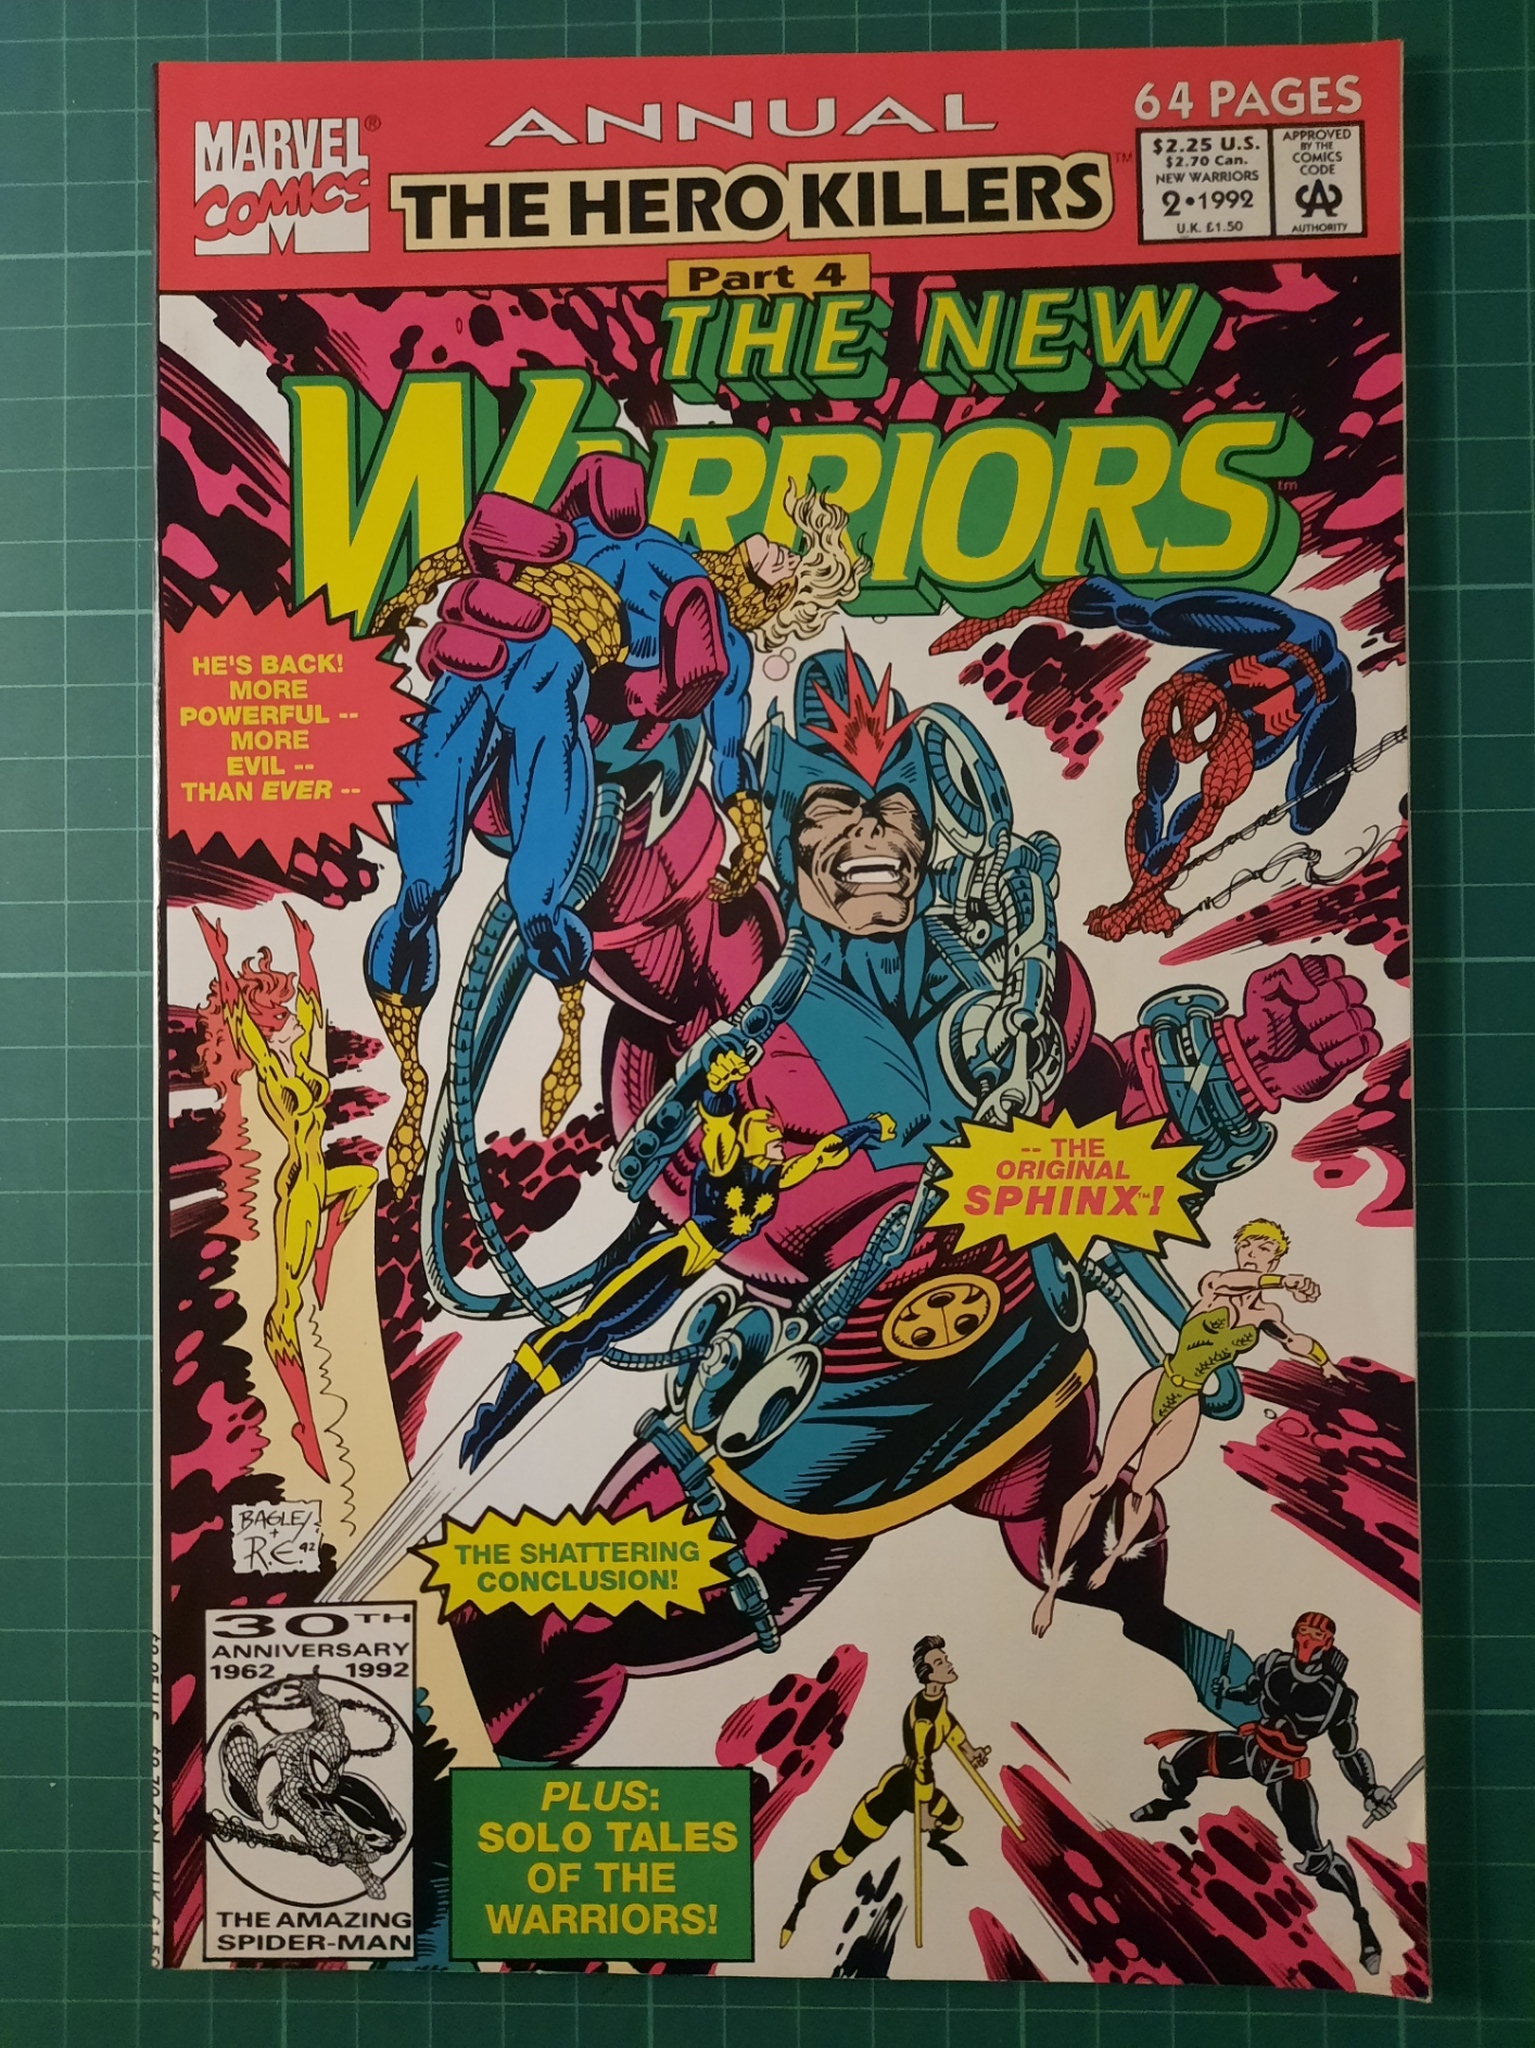 The new warriors annual #1 1992